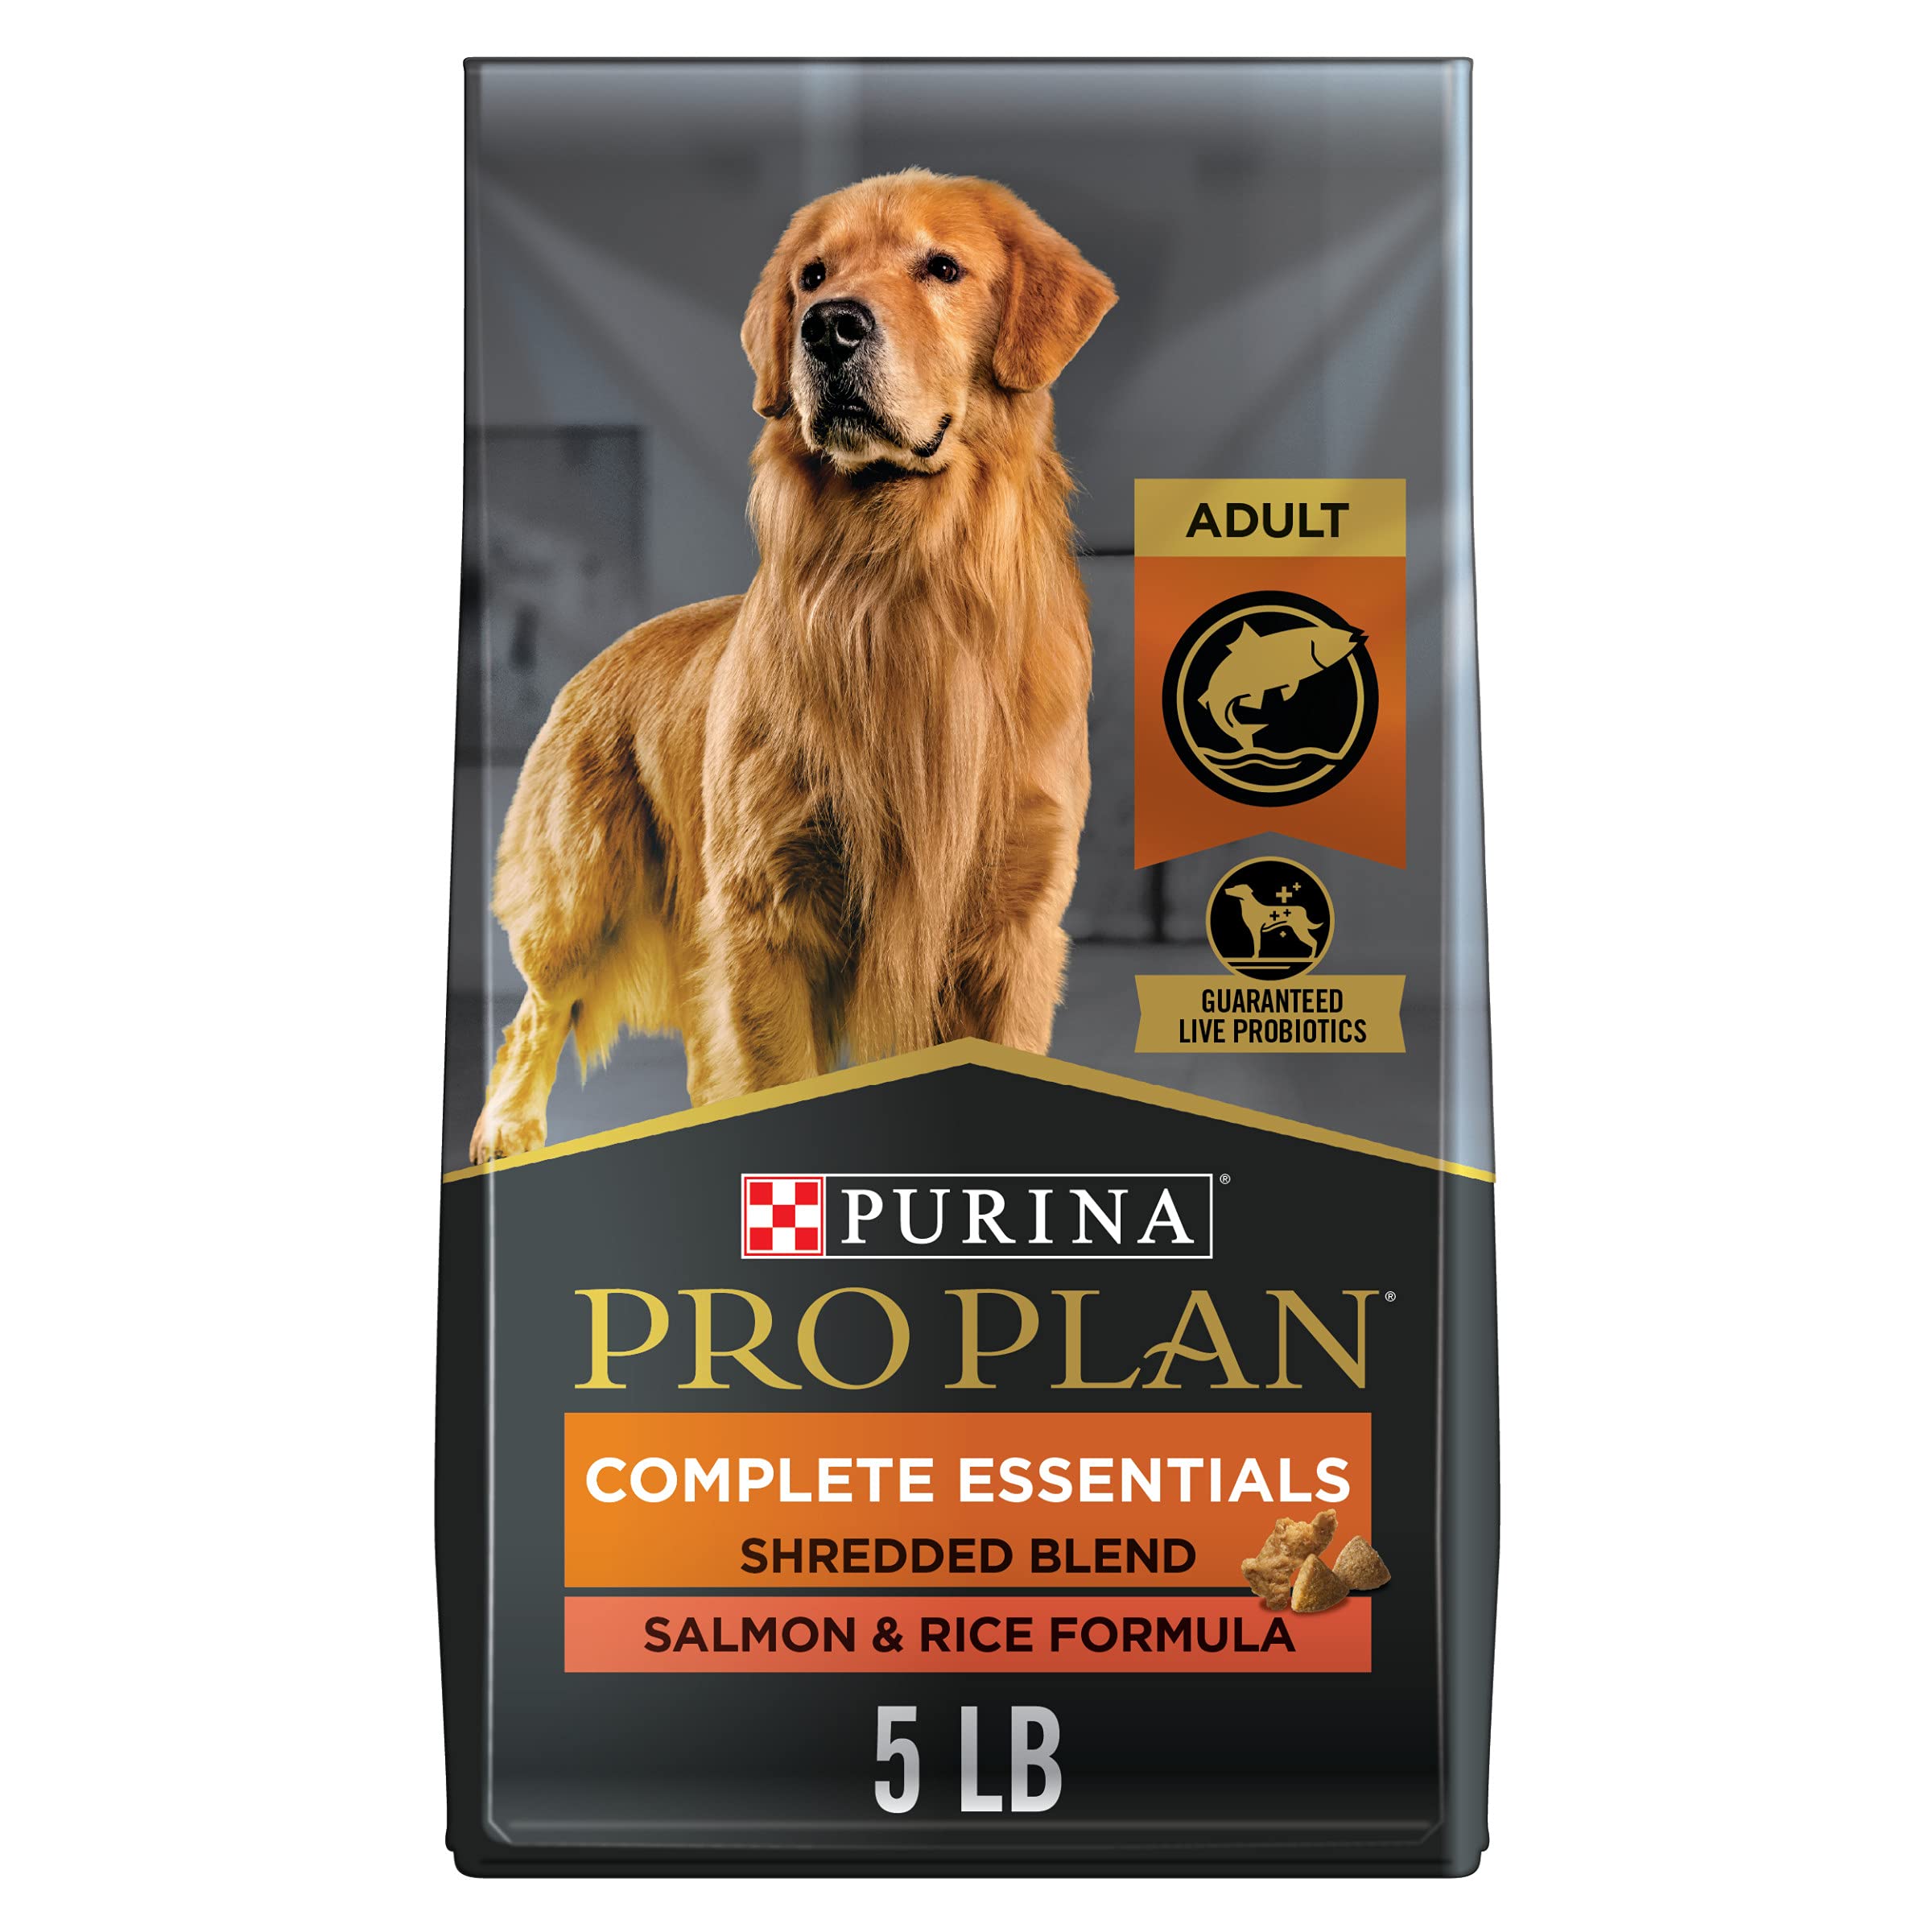 Purina High Protein Dog Food with Probiotics for Dogs, Shredded Blend Salmon & Rice Formula - 33 lb. Bag